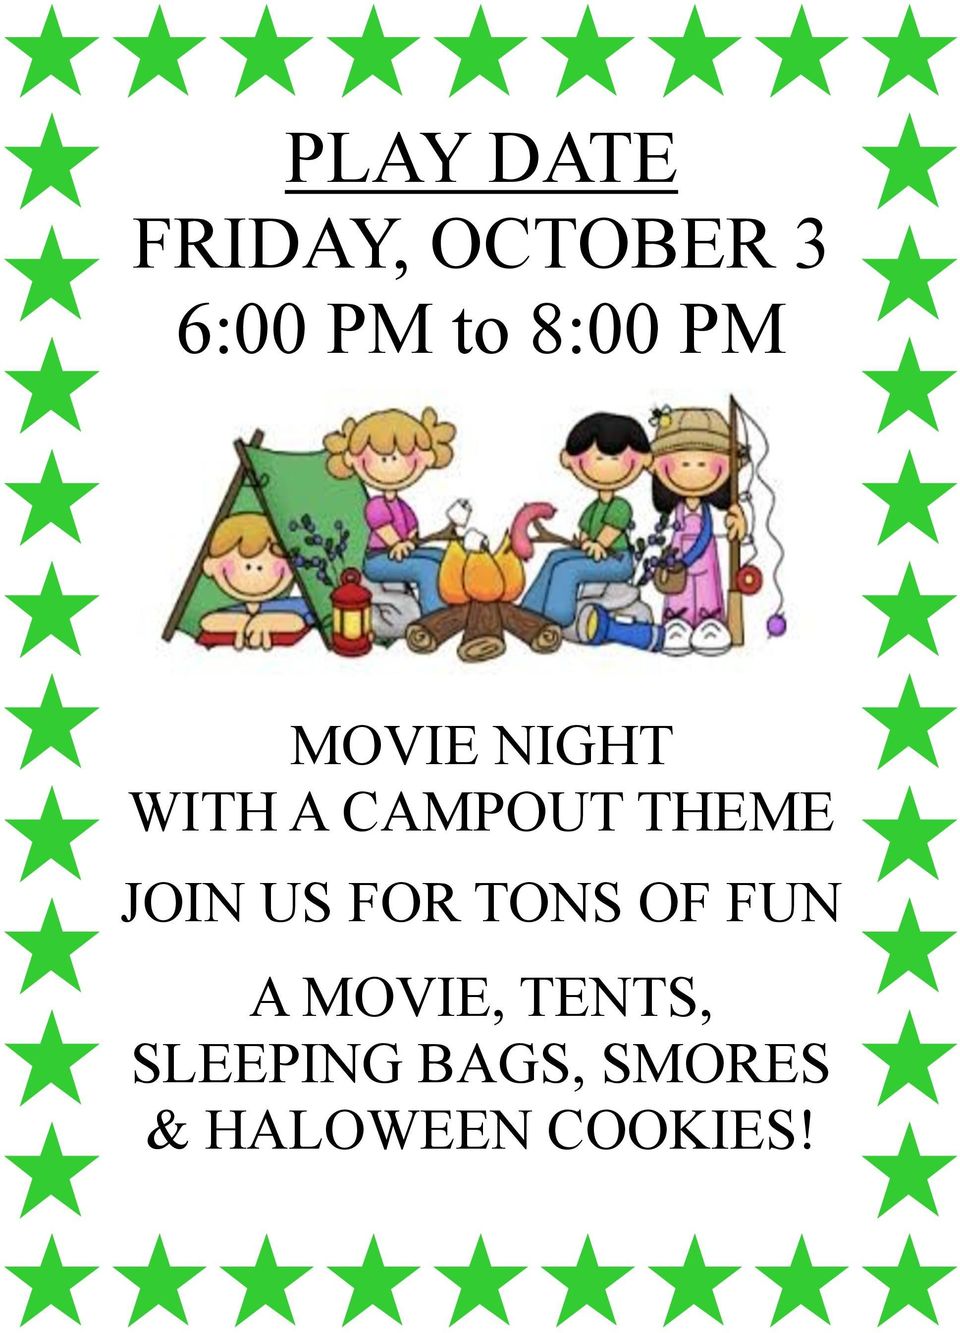 JOIN US FOR TONS OF FUN A MOVIE, TENTS,